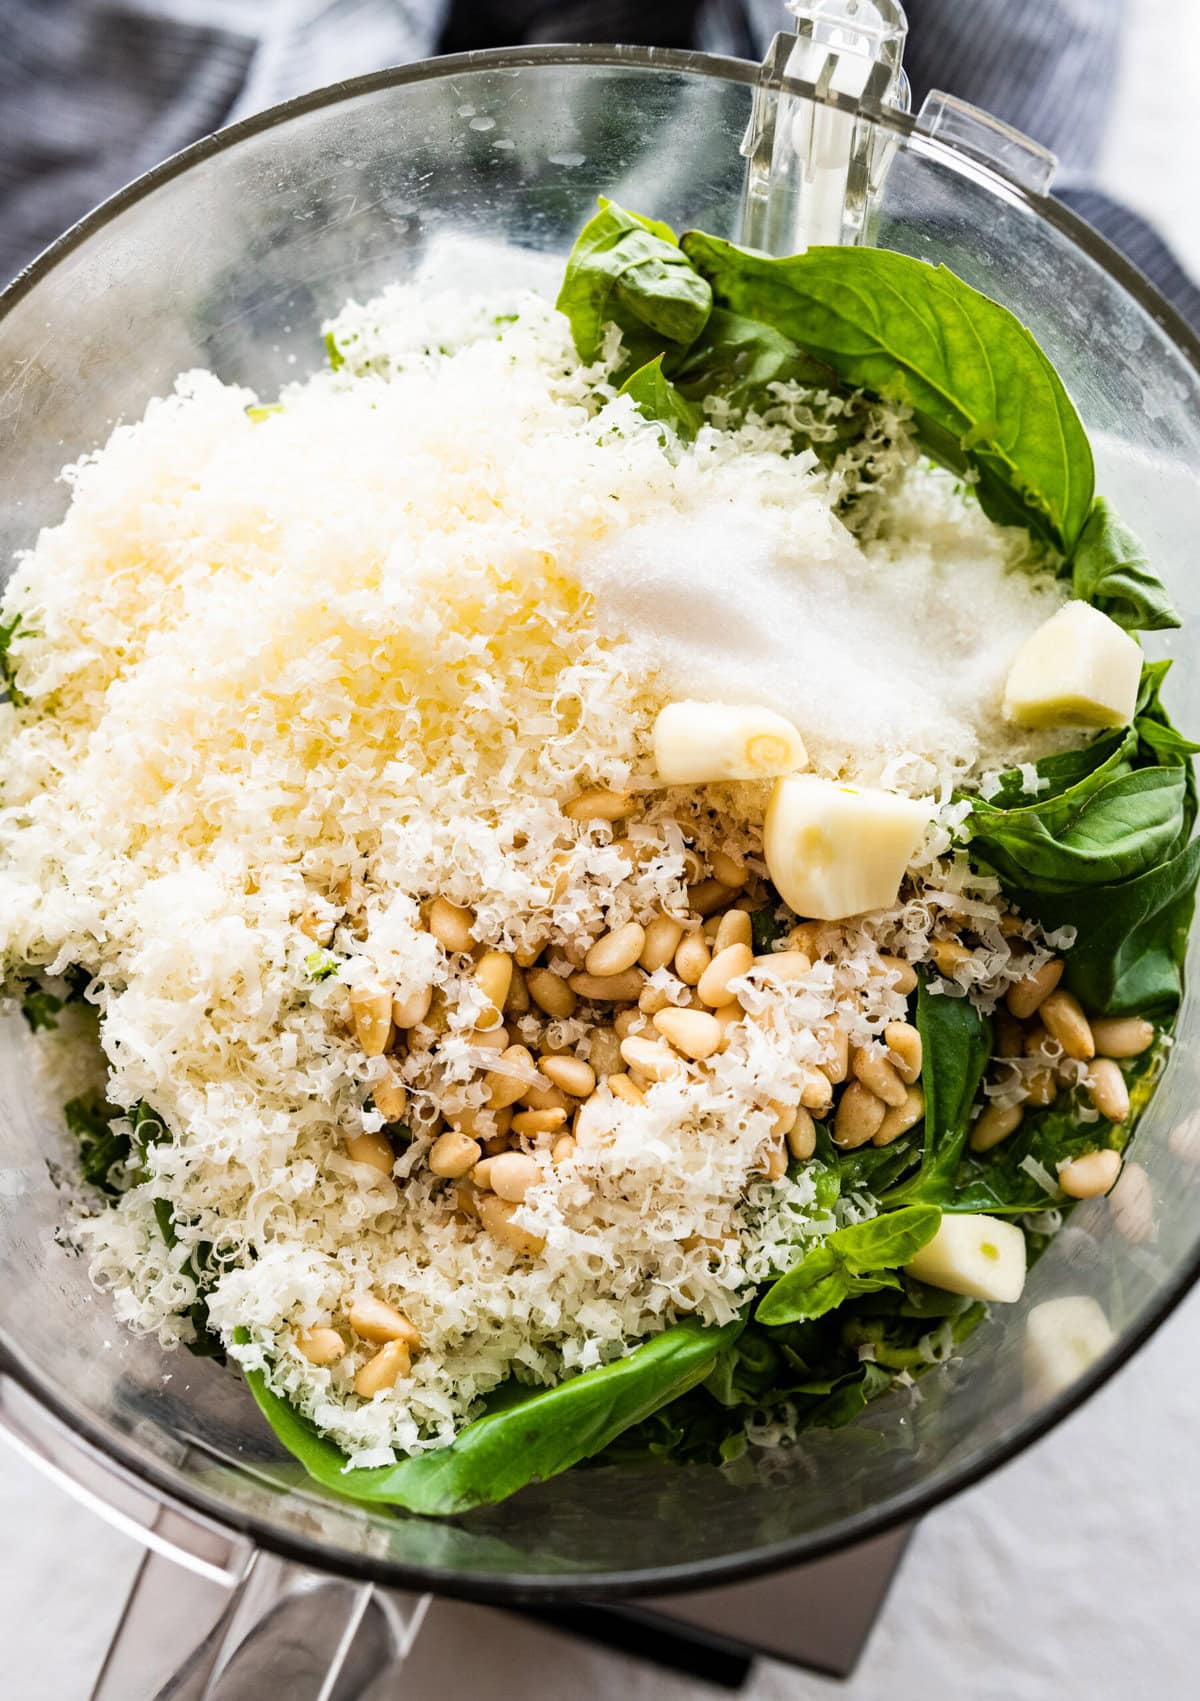 how to make basil pesto- add the cheese and garlic to the blender.